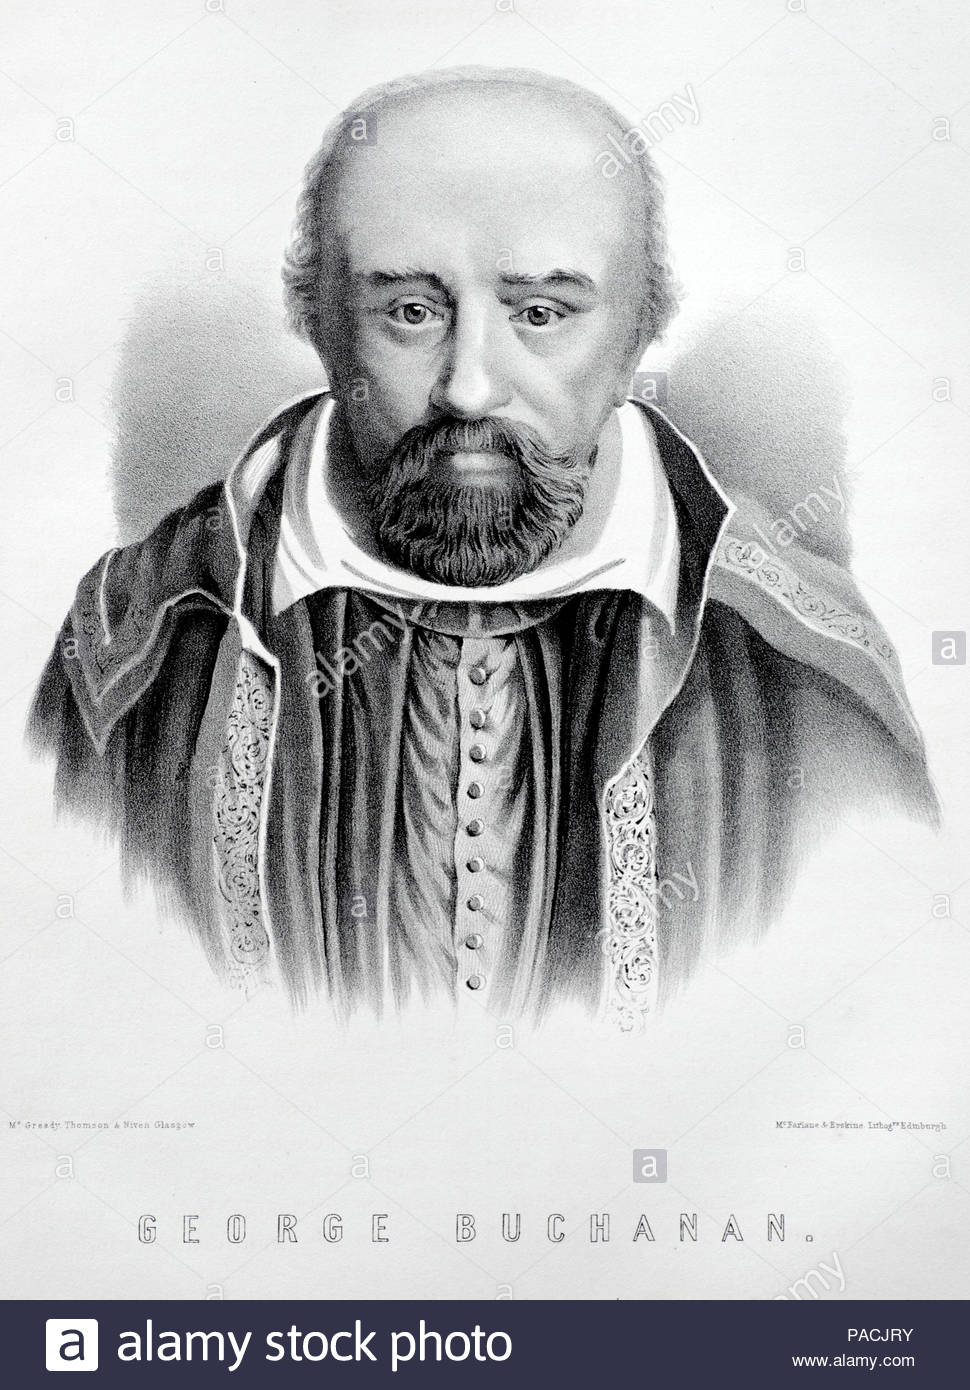 George Buchanan, Tutor of King James I of England was a Scottish historian and humanist scholar 1506 – 1582, antique engraving from 1879 Stock Photo